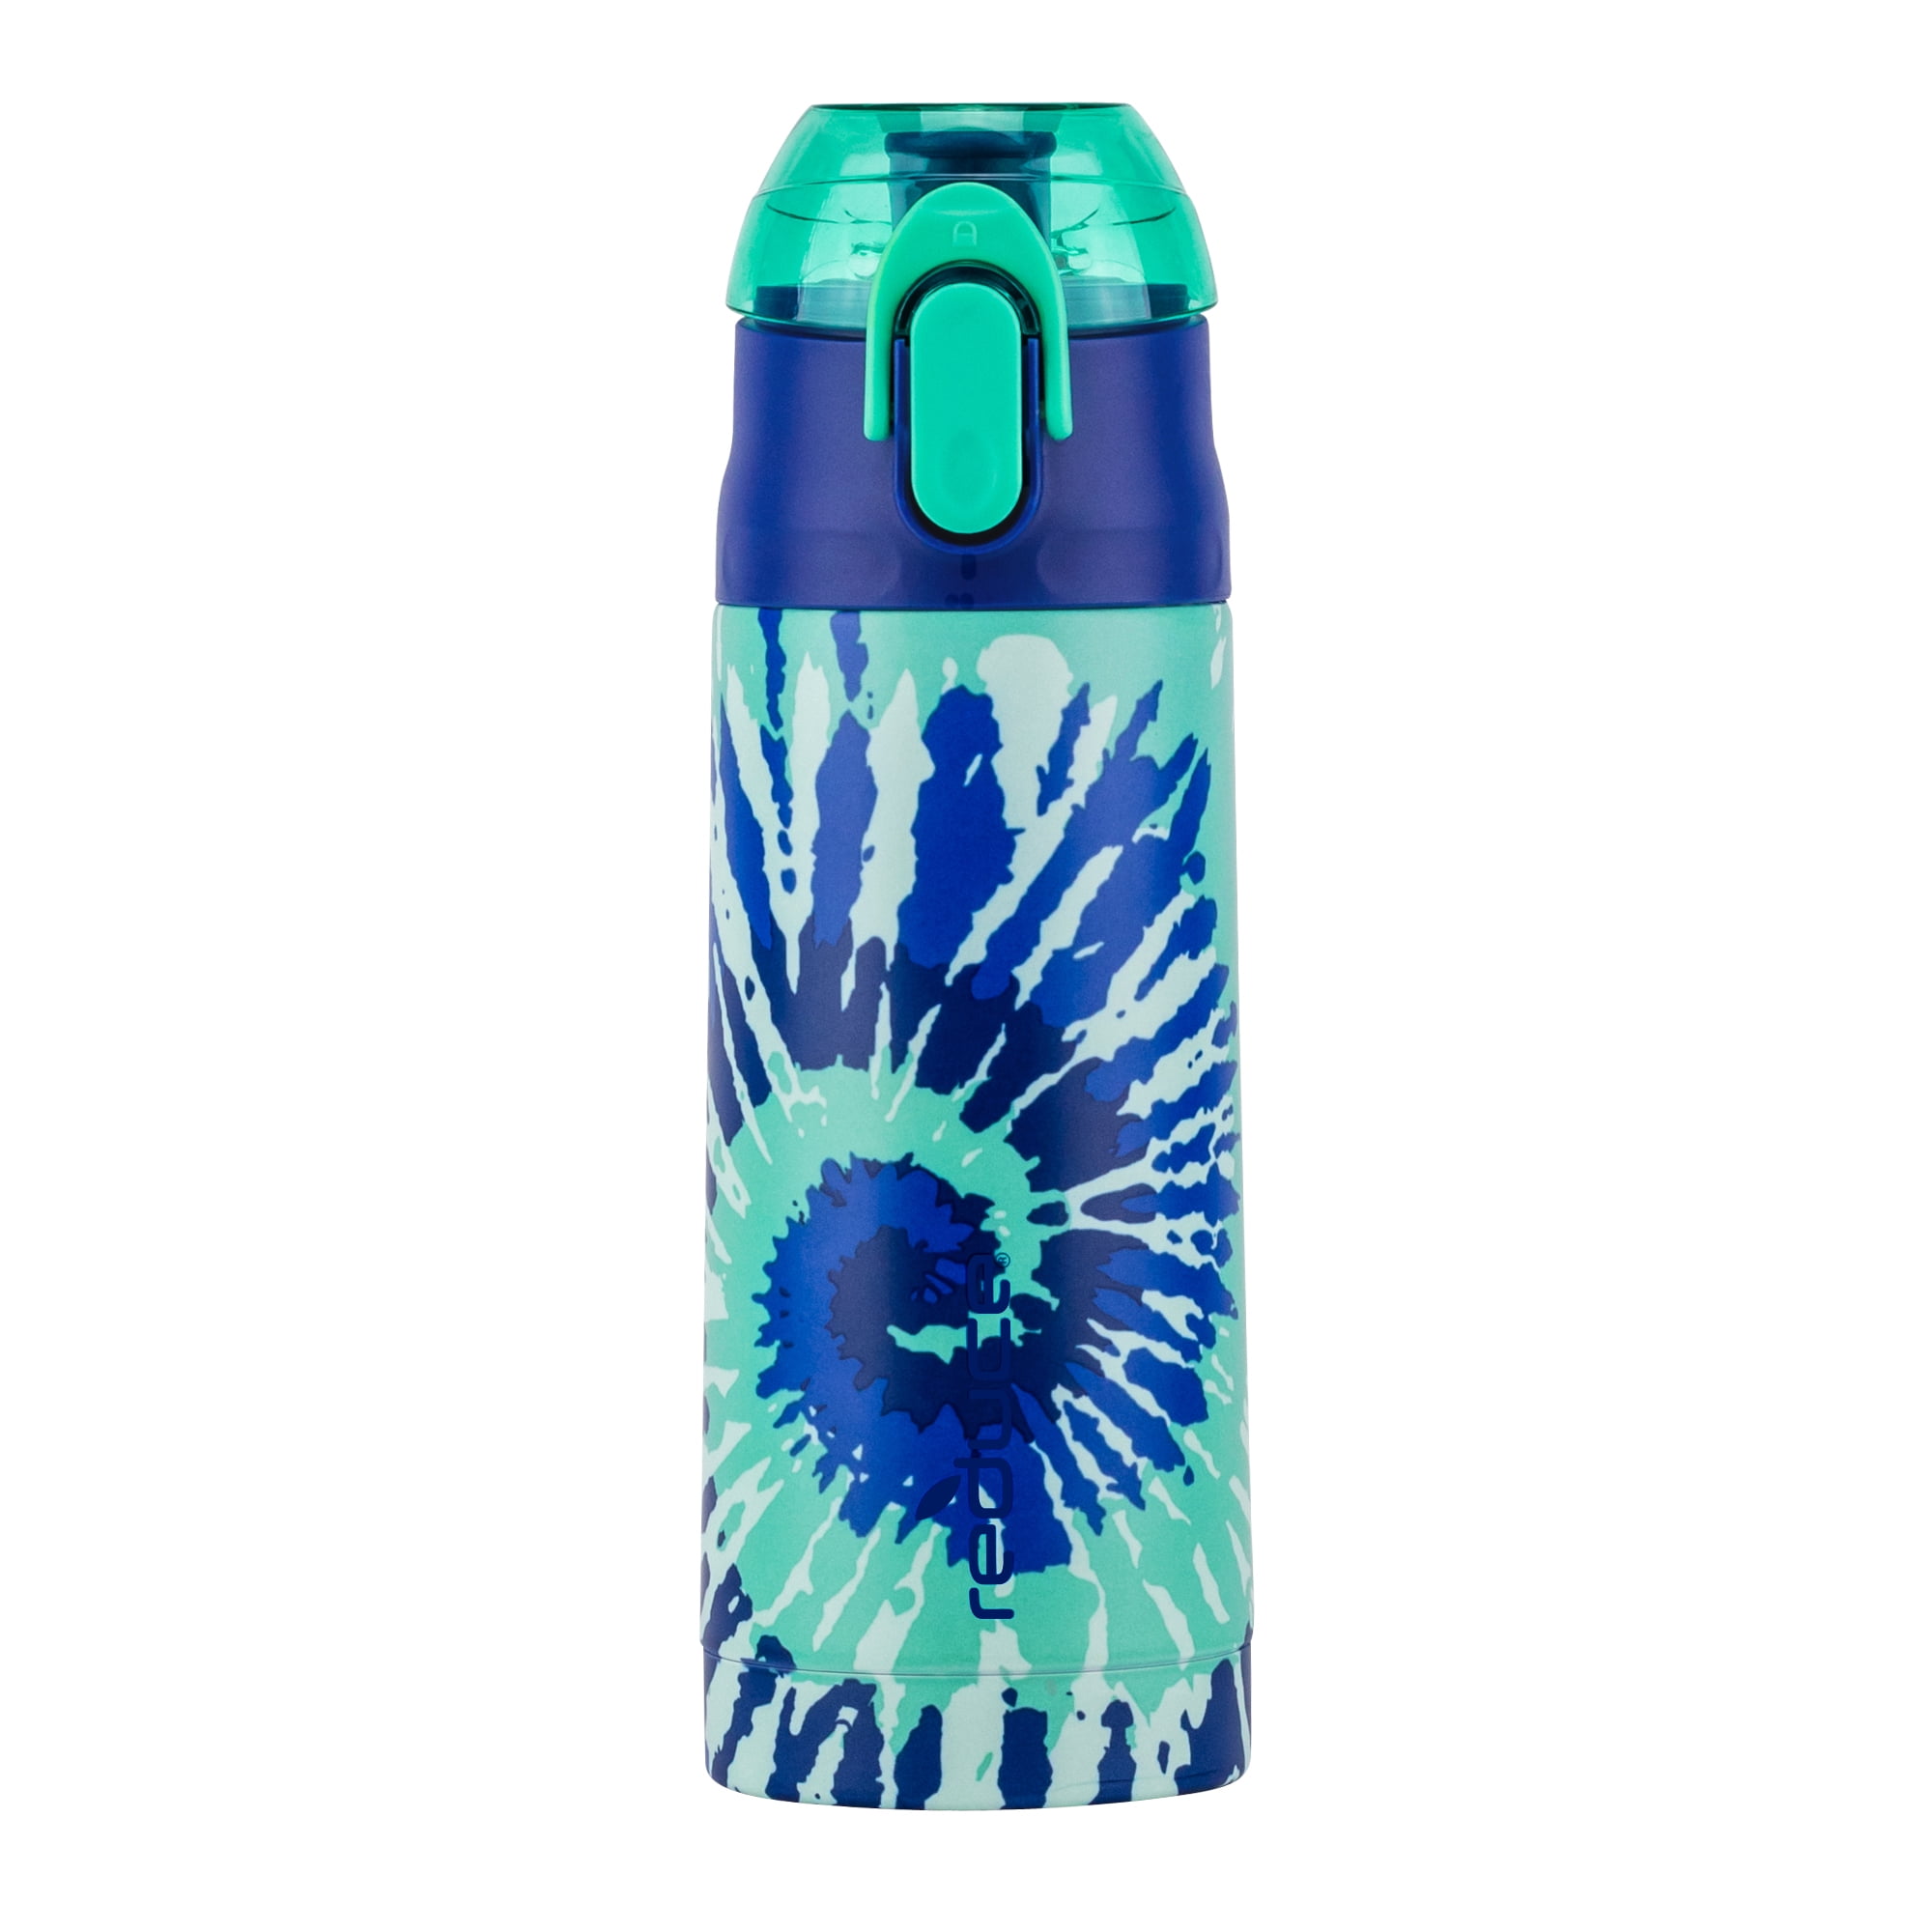 Name & Initial Personalized 13 oz Reduce Frostee Water Bottle - Blue